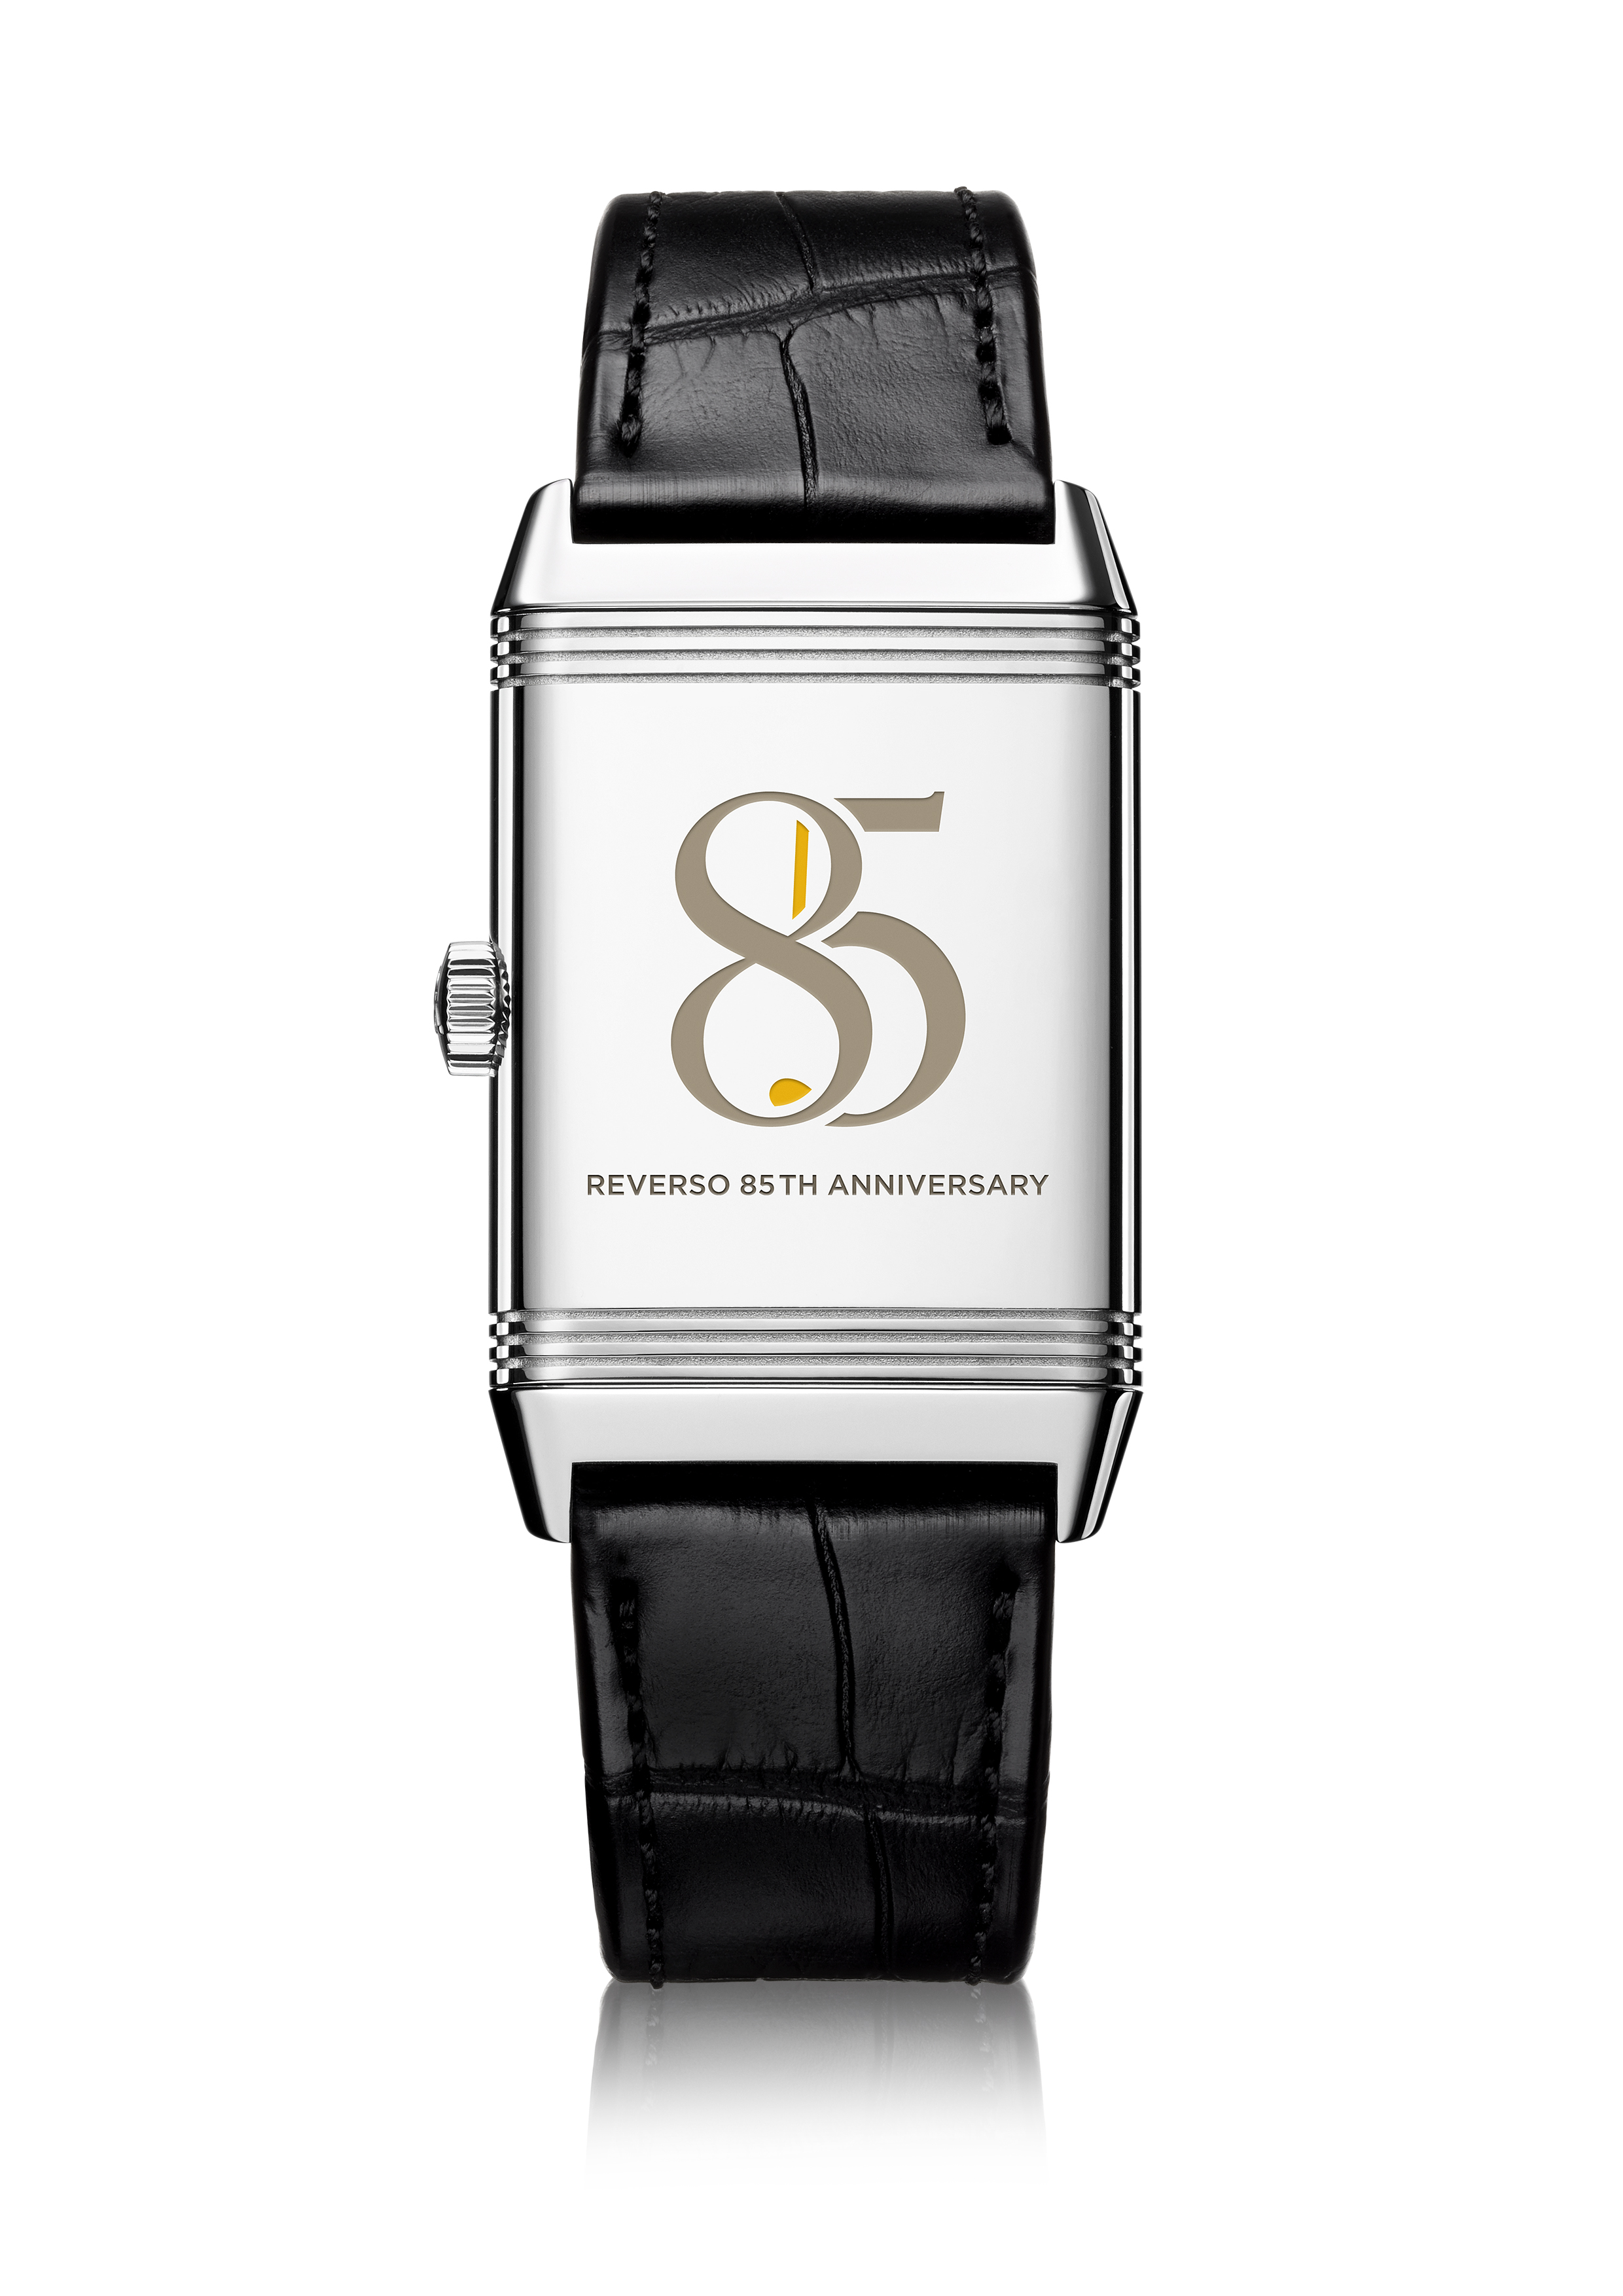 Jaeger-LeCoultre Reverso Classic engraved 85th Anniversary